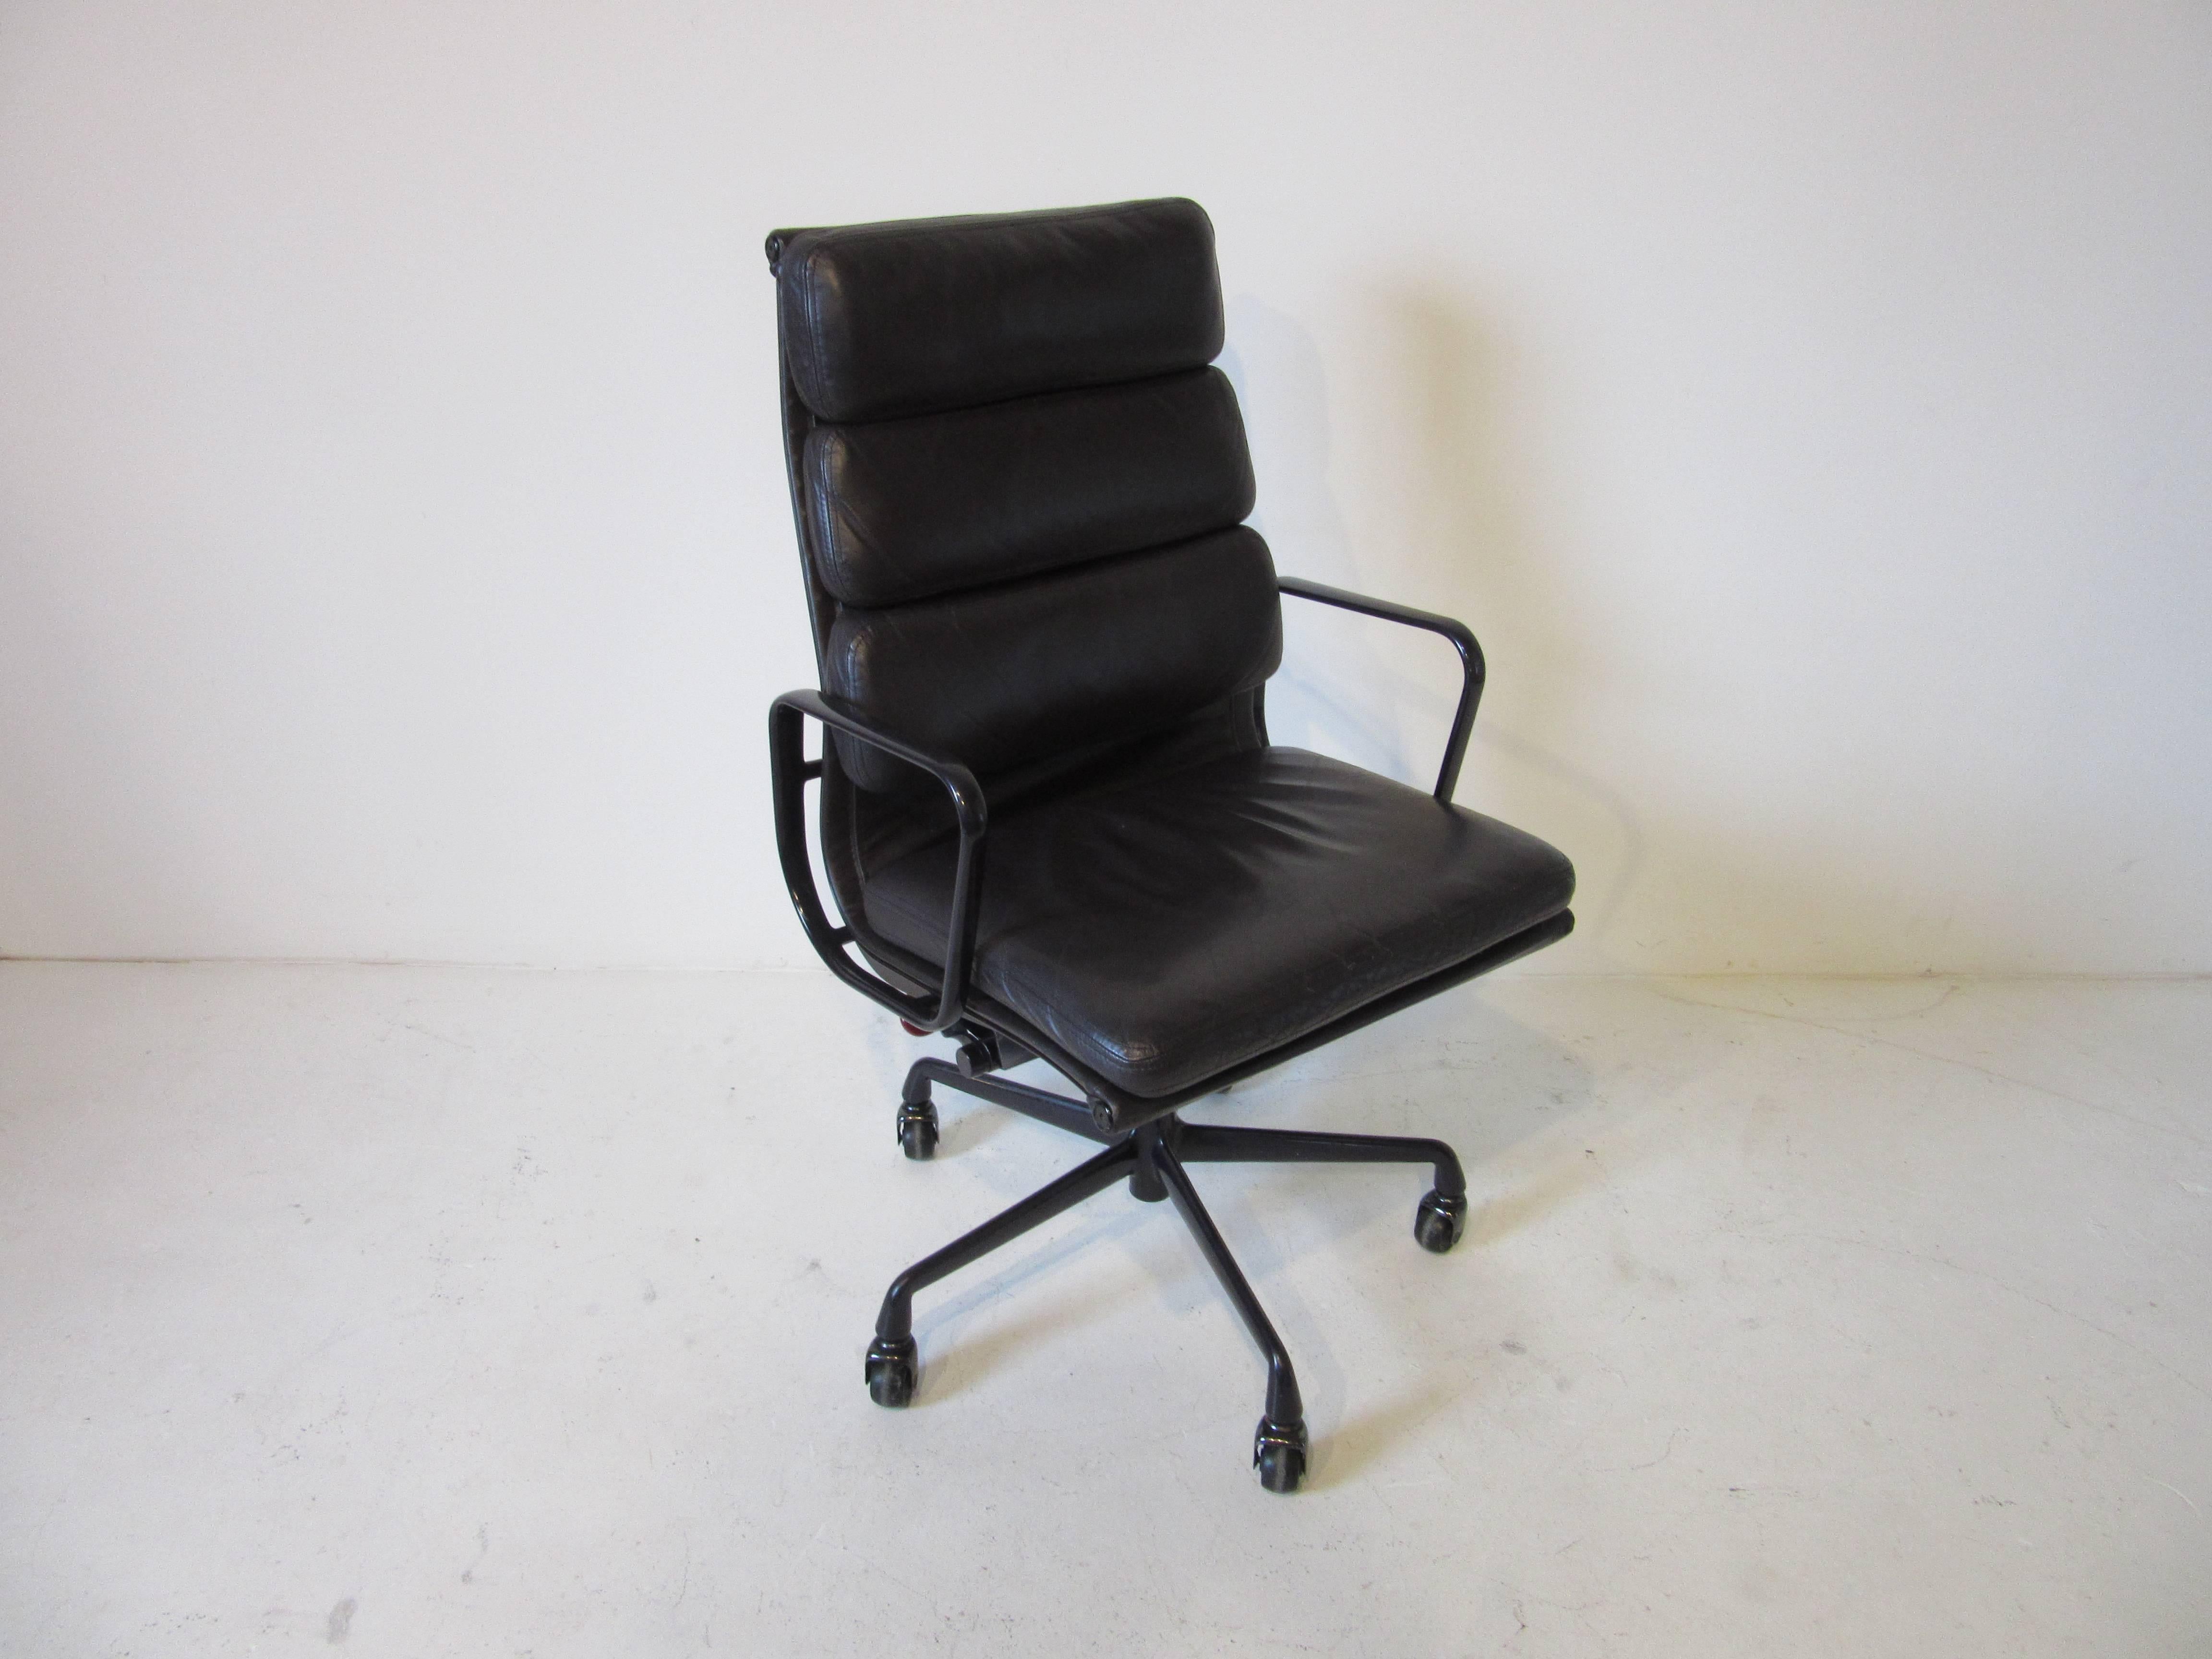 A rich and buttery soft leather aluminium group rolling executive armchair special ordered in a dark eggplant with matching arms and base . Manufactured by the Herman Miller Furniture Company. The chair is adjustable with seat height measures: 26